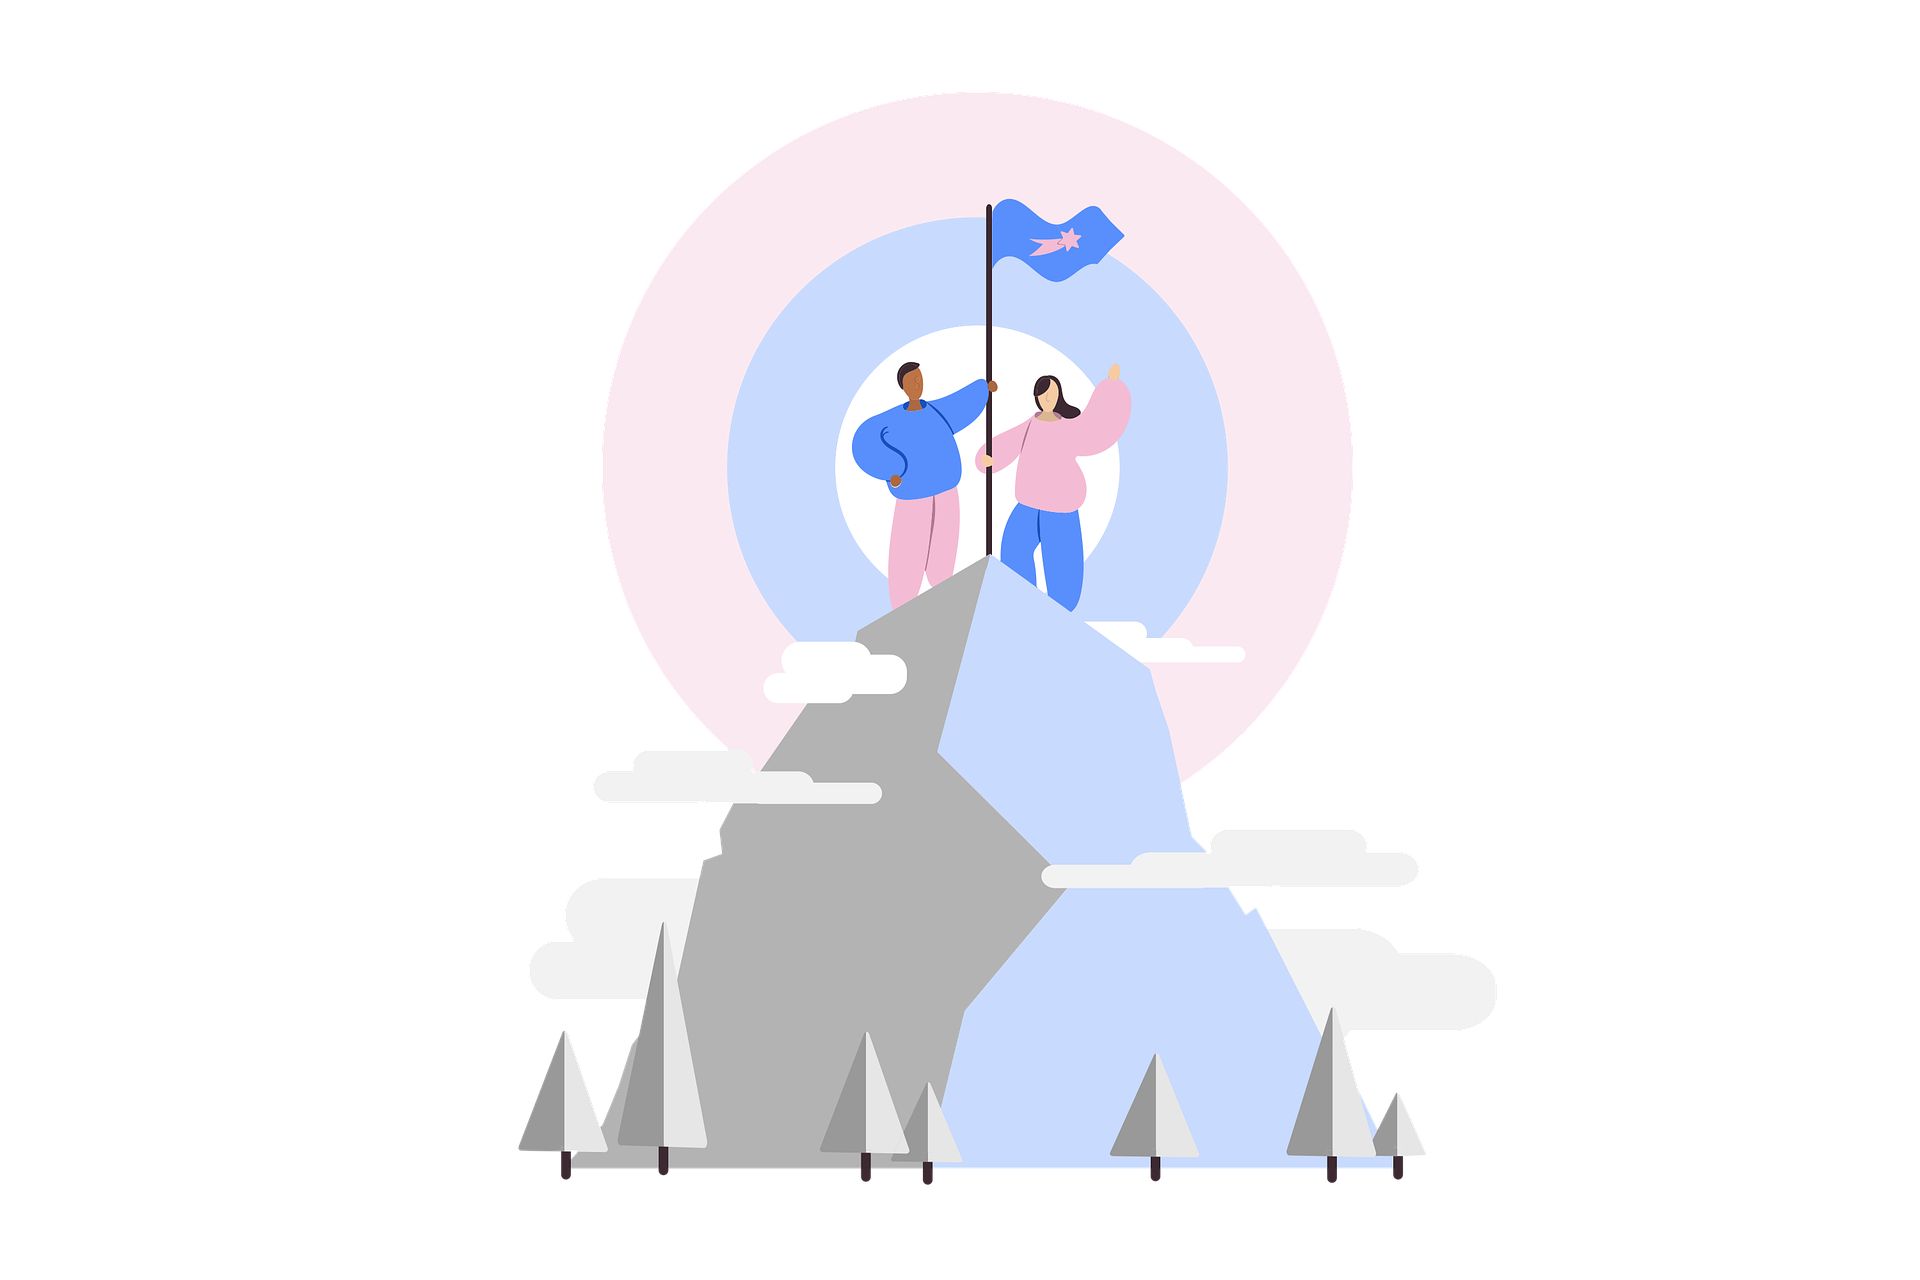 Two animated people on a mountain